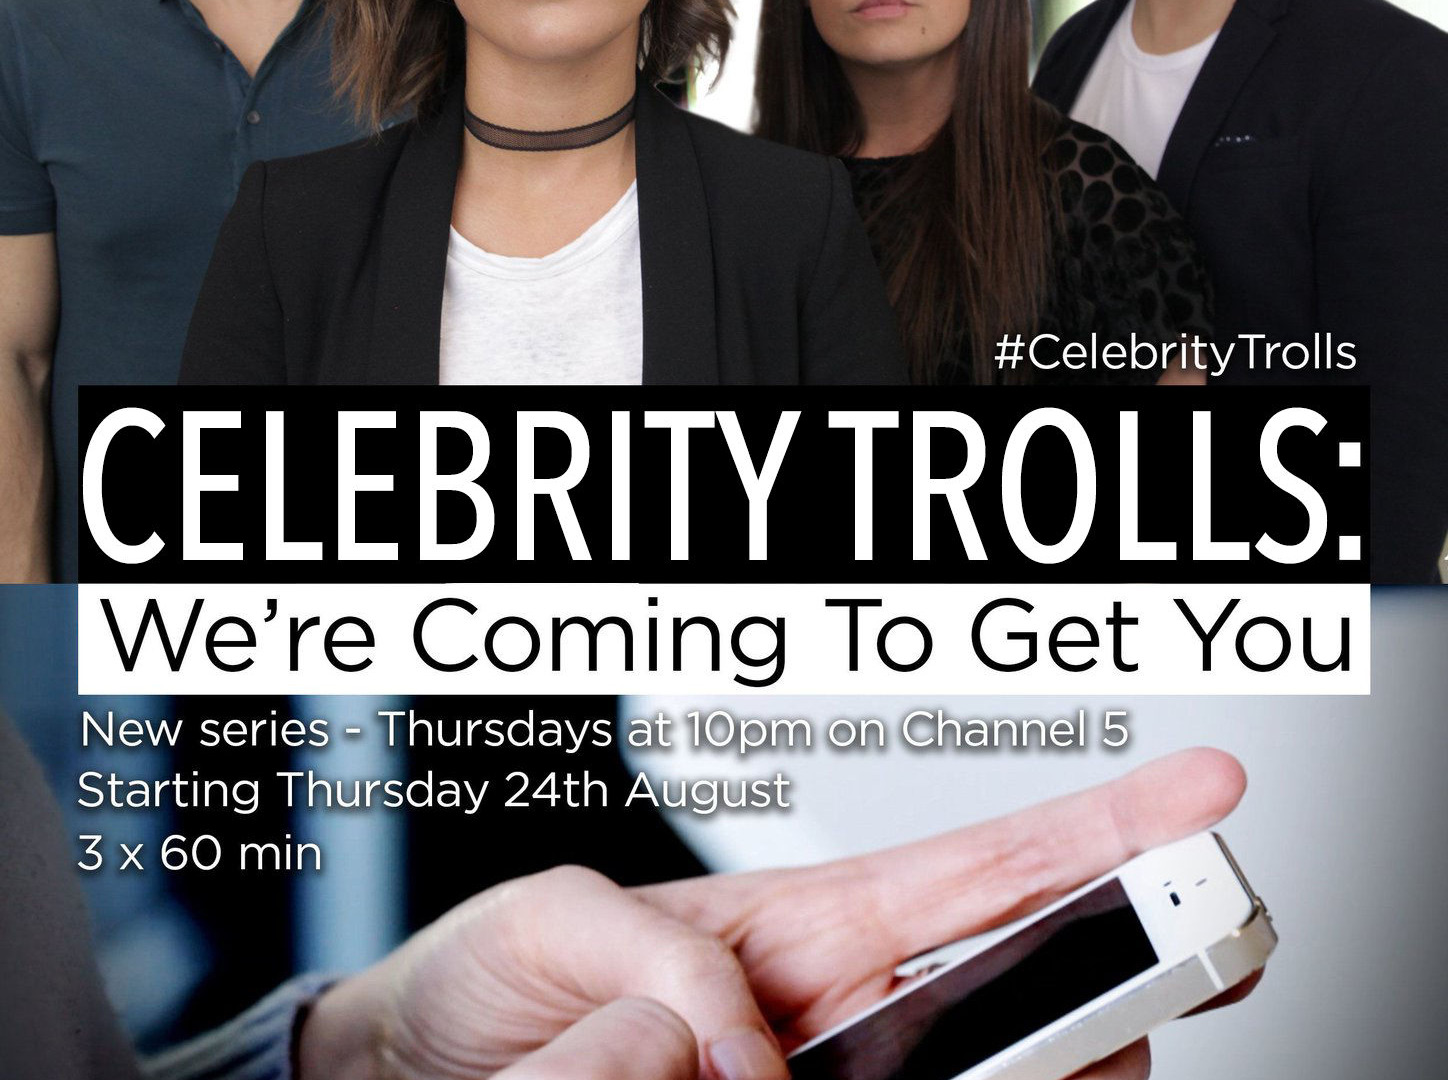 Show Celebrity Trolls: We're Coming to Get You